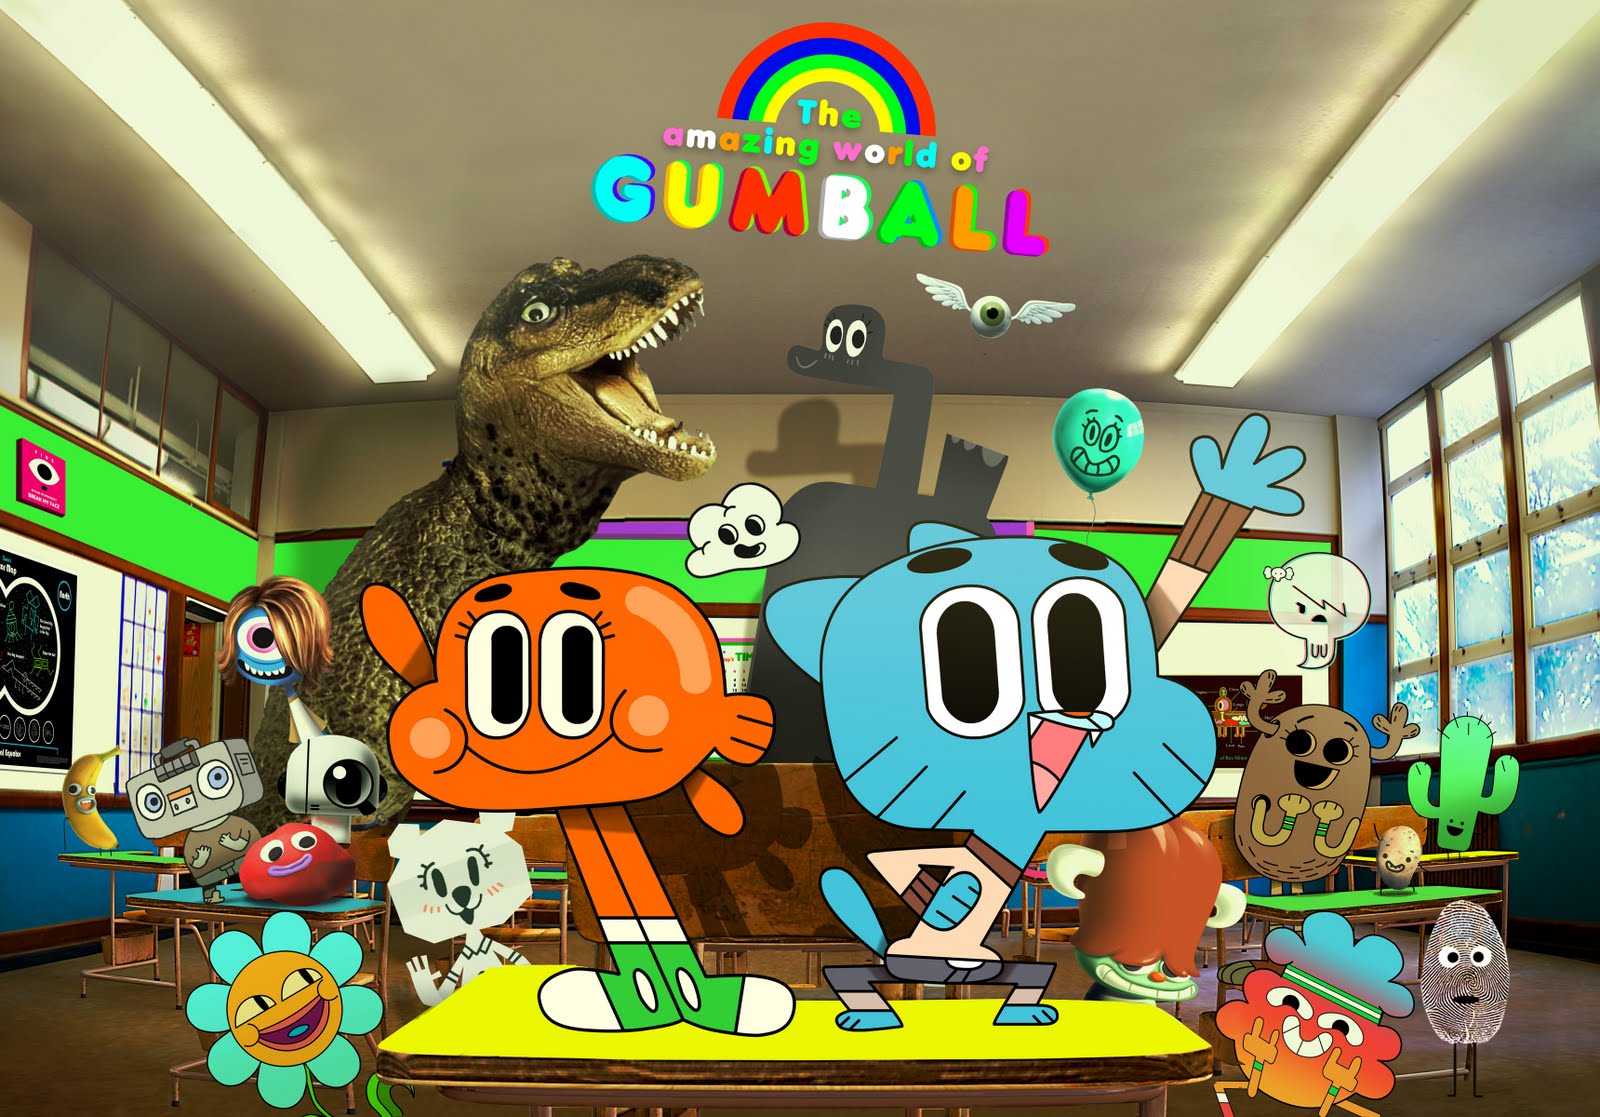 List of The Amazing World of Gumball characters - Wikipedia